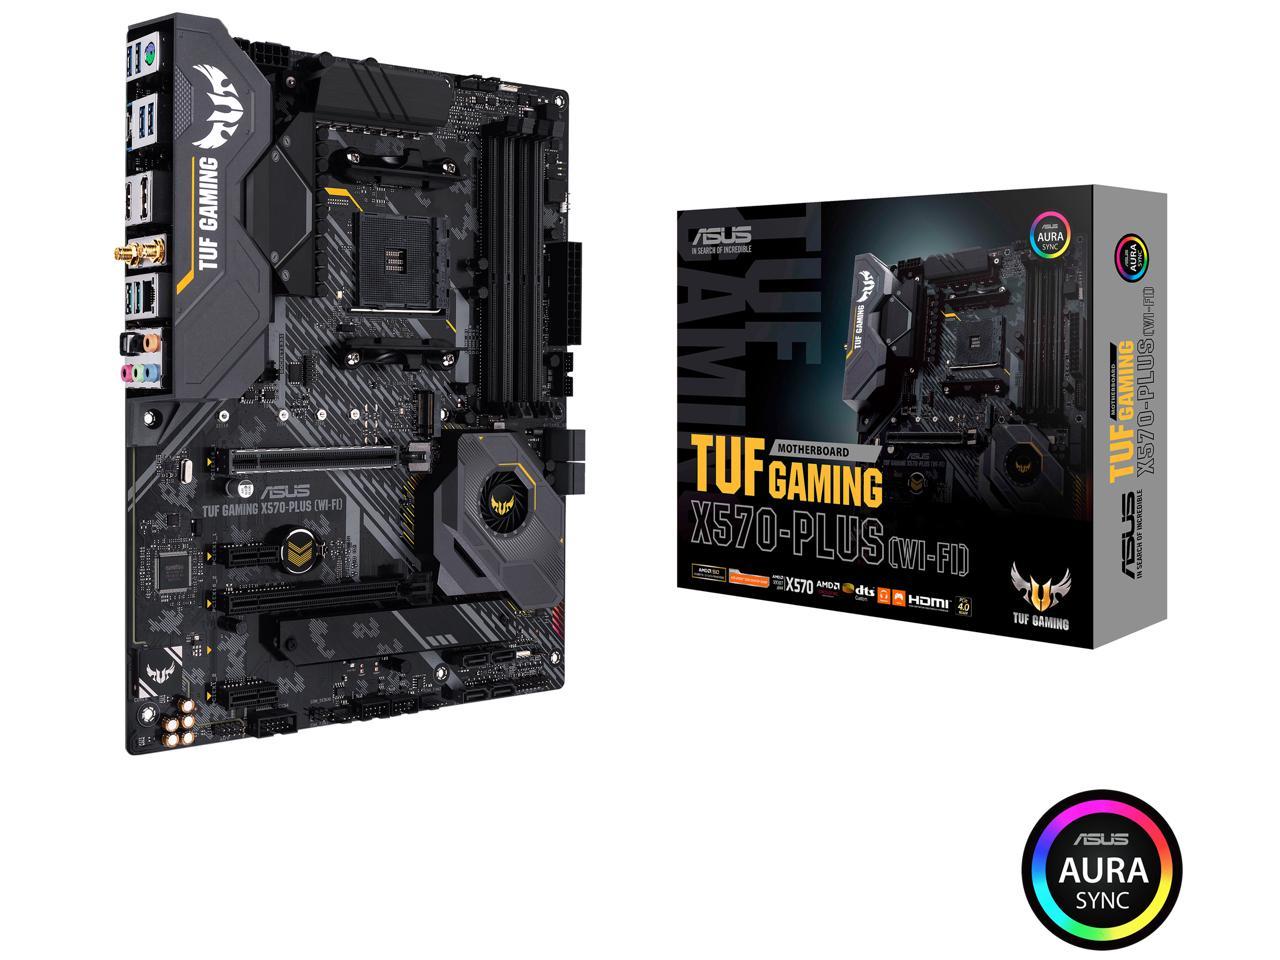 Bourgeon Jet Sluipmoordenaar Open Box: ASUS AM4 TUF Gaming X570-Plus (Wi-Fi) ATX Motherboard with PCIe  4.0, Dual M.2, 12+2 with Dr. MOS Power Stage, HDMI, DP, SATA 6Gb/s, USB 3.2  Gen 2 and Aura Sync